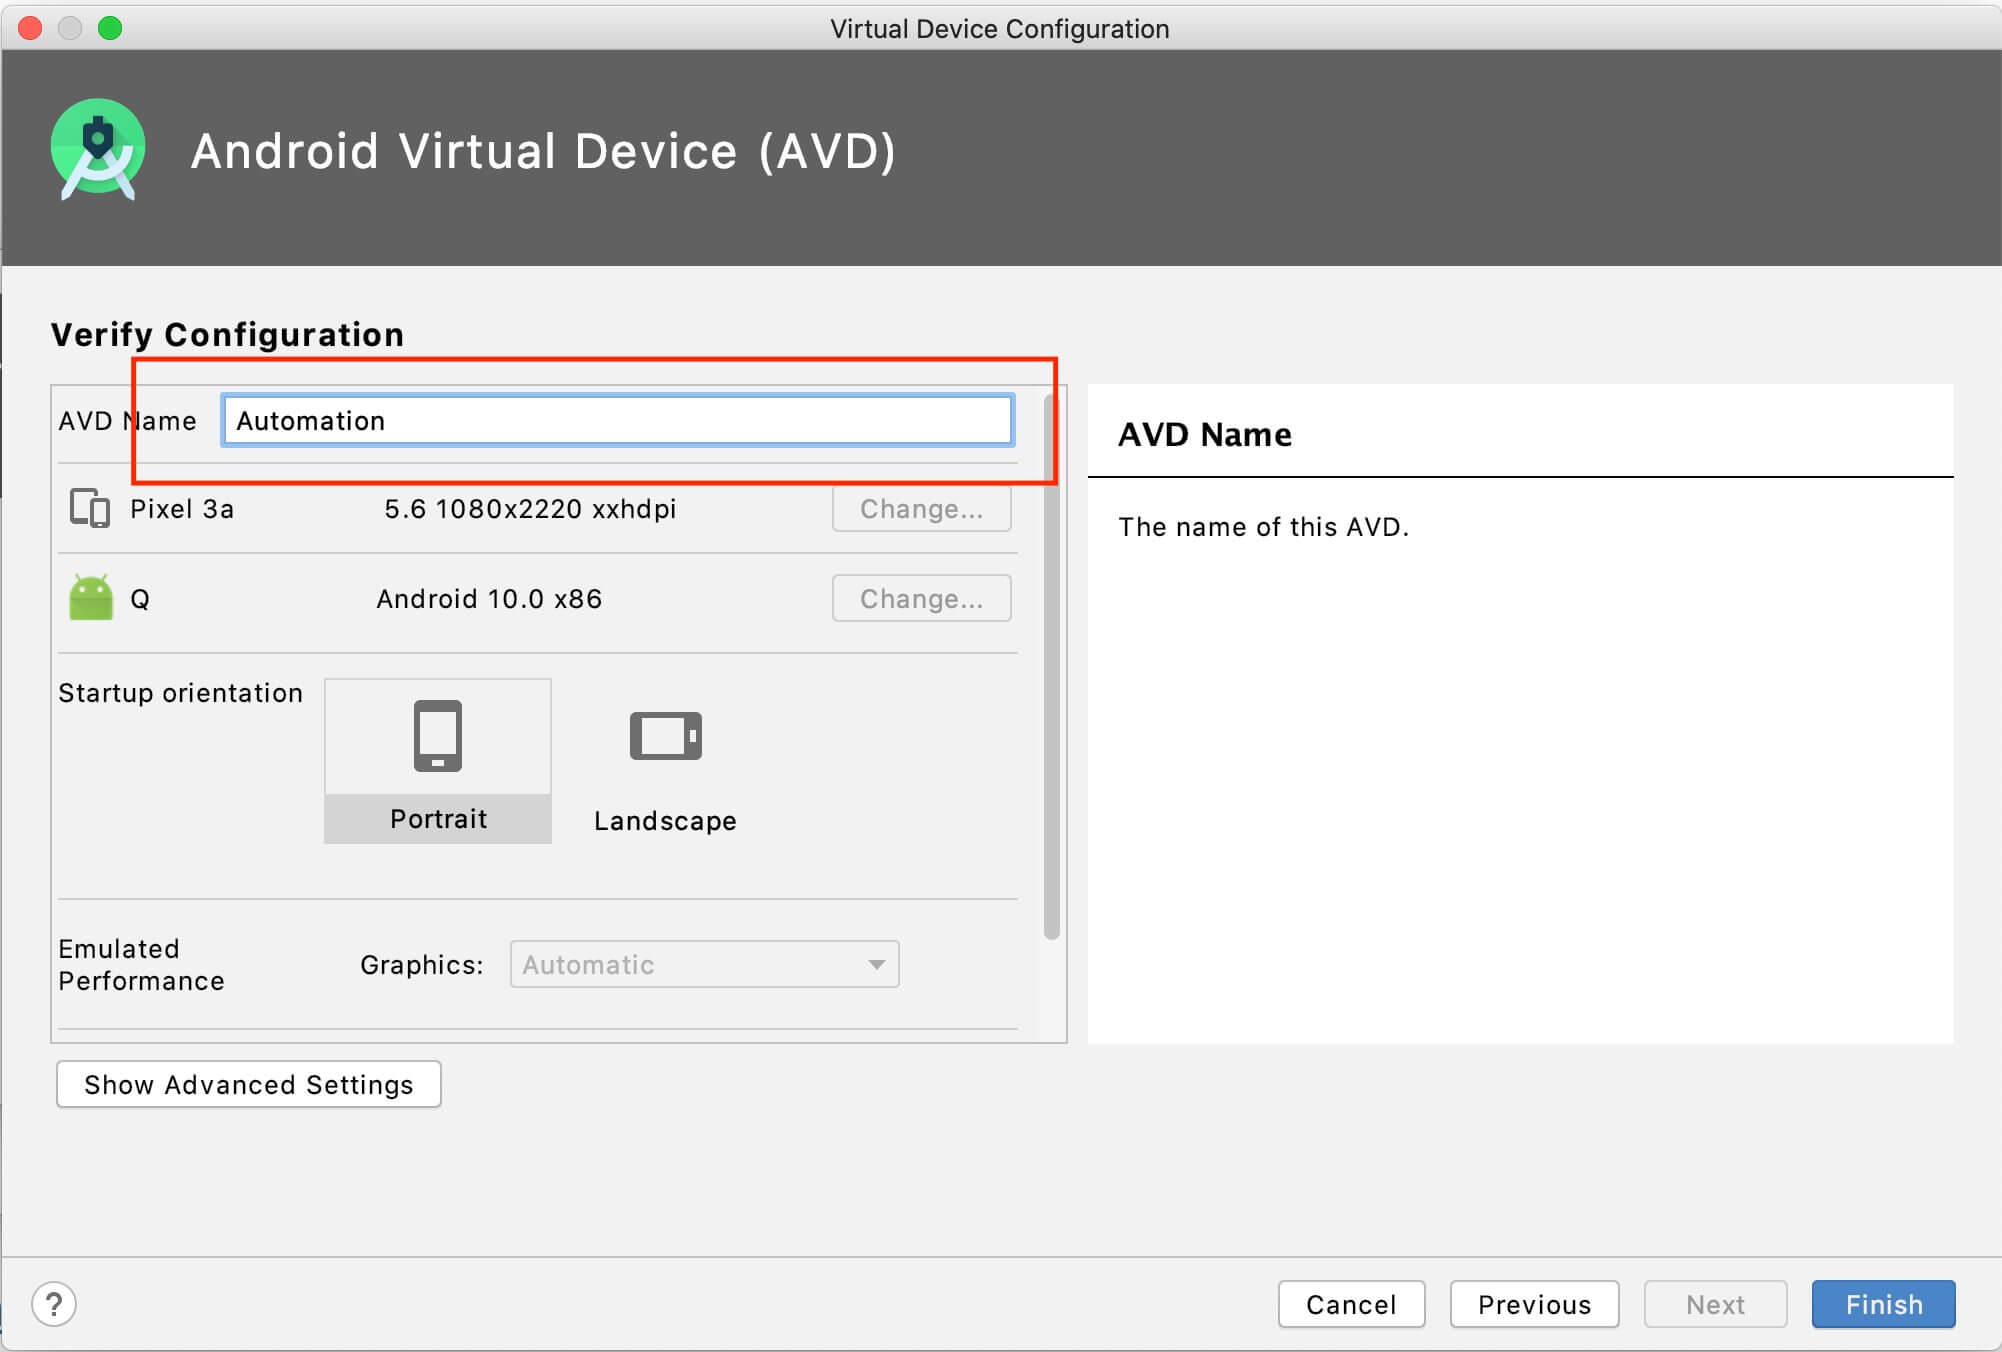 Shows Android emulator configuration with AVD Name